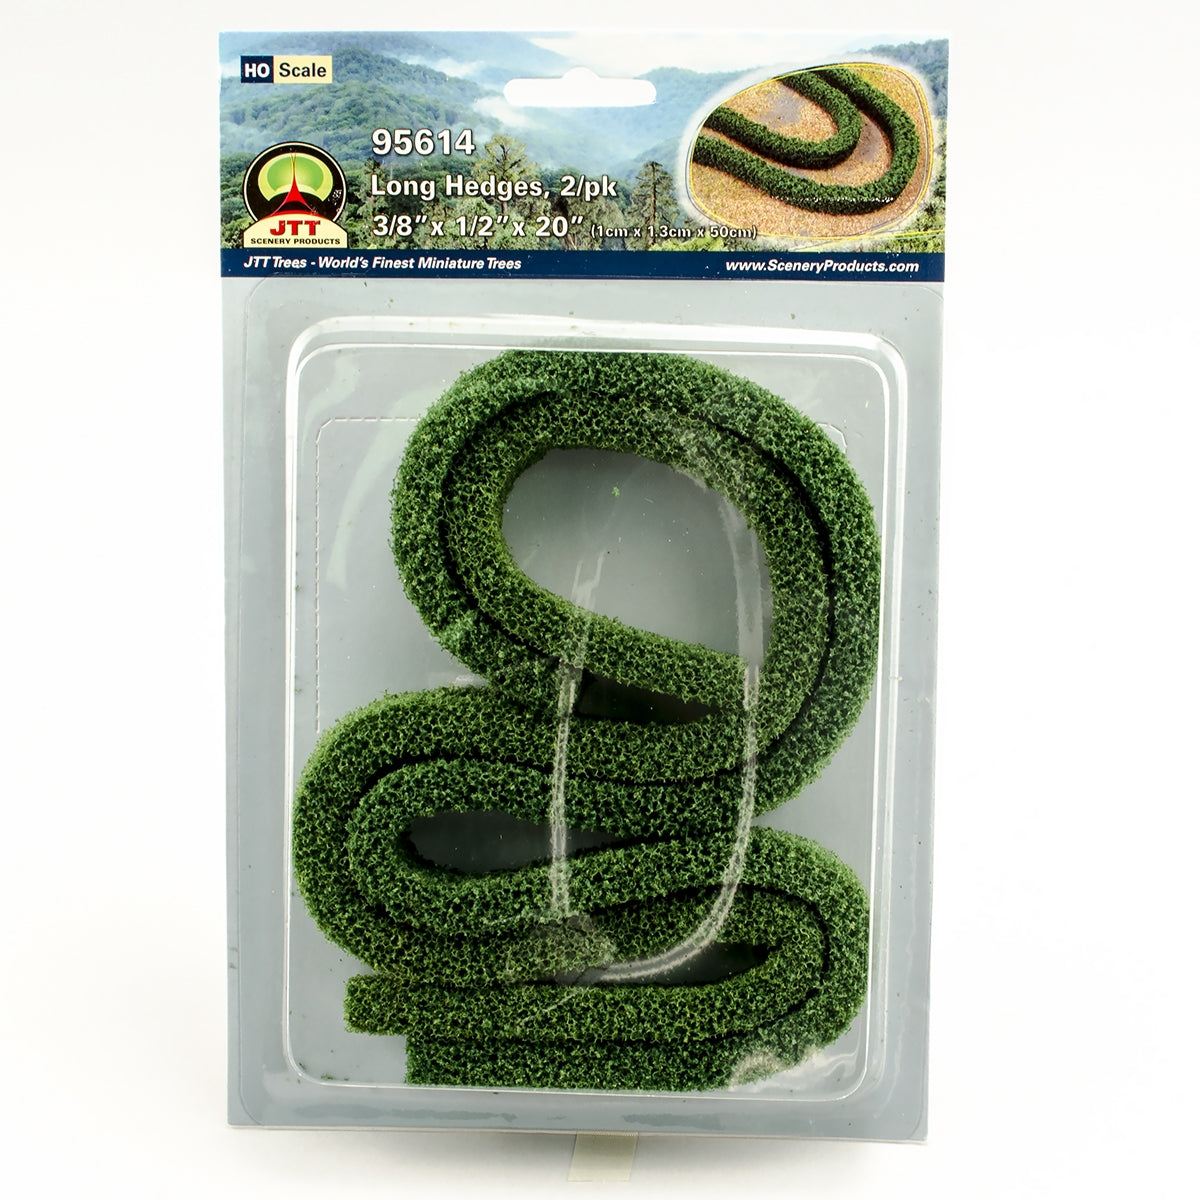 JTT Scenery Products 95614 HO 3/8"x 1/2" x 20" Long Hedges (Pack of 2)